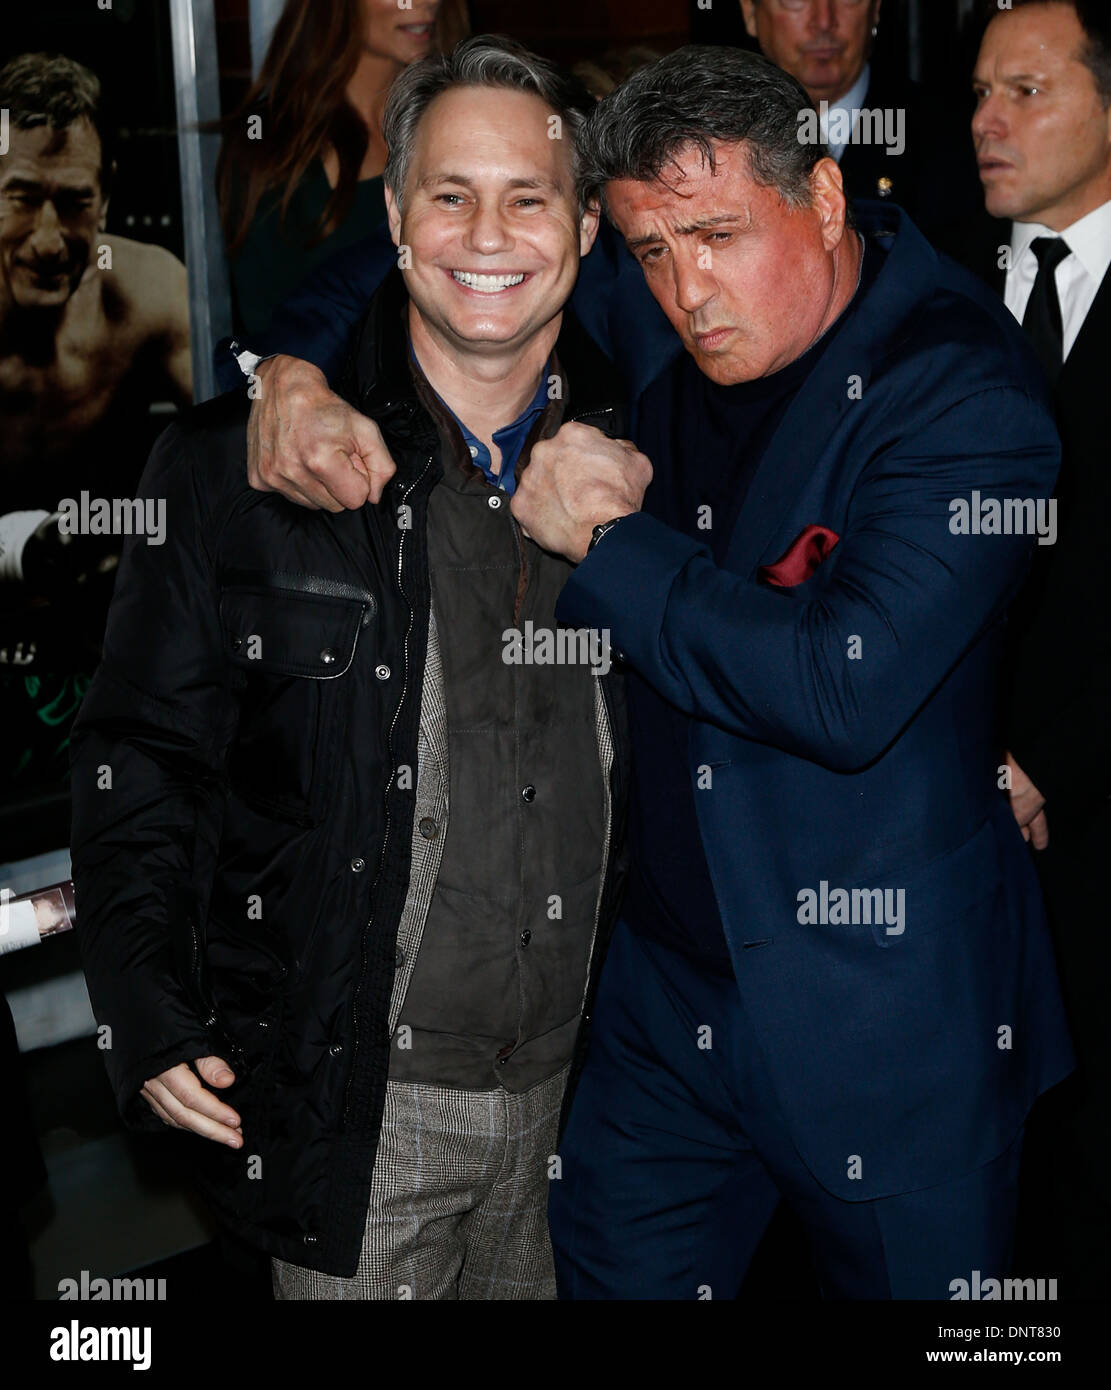 Founder of DuJour Media Group Jason Binn (L) and Sylvester Stallone attend the world premiere of 'Grudge Match' Stock Photo